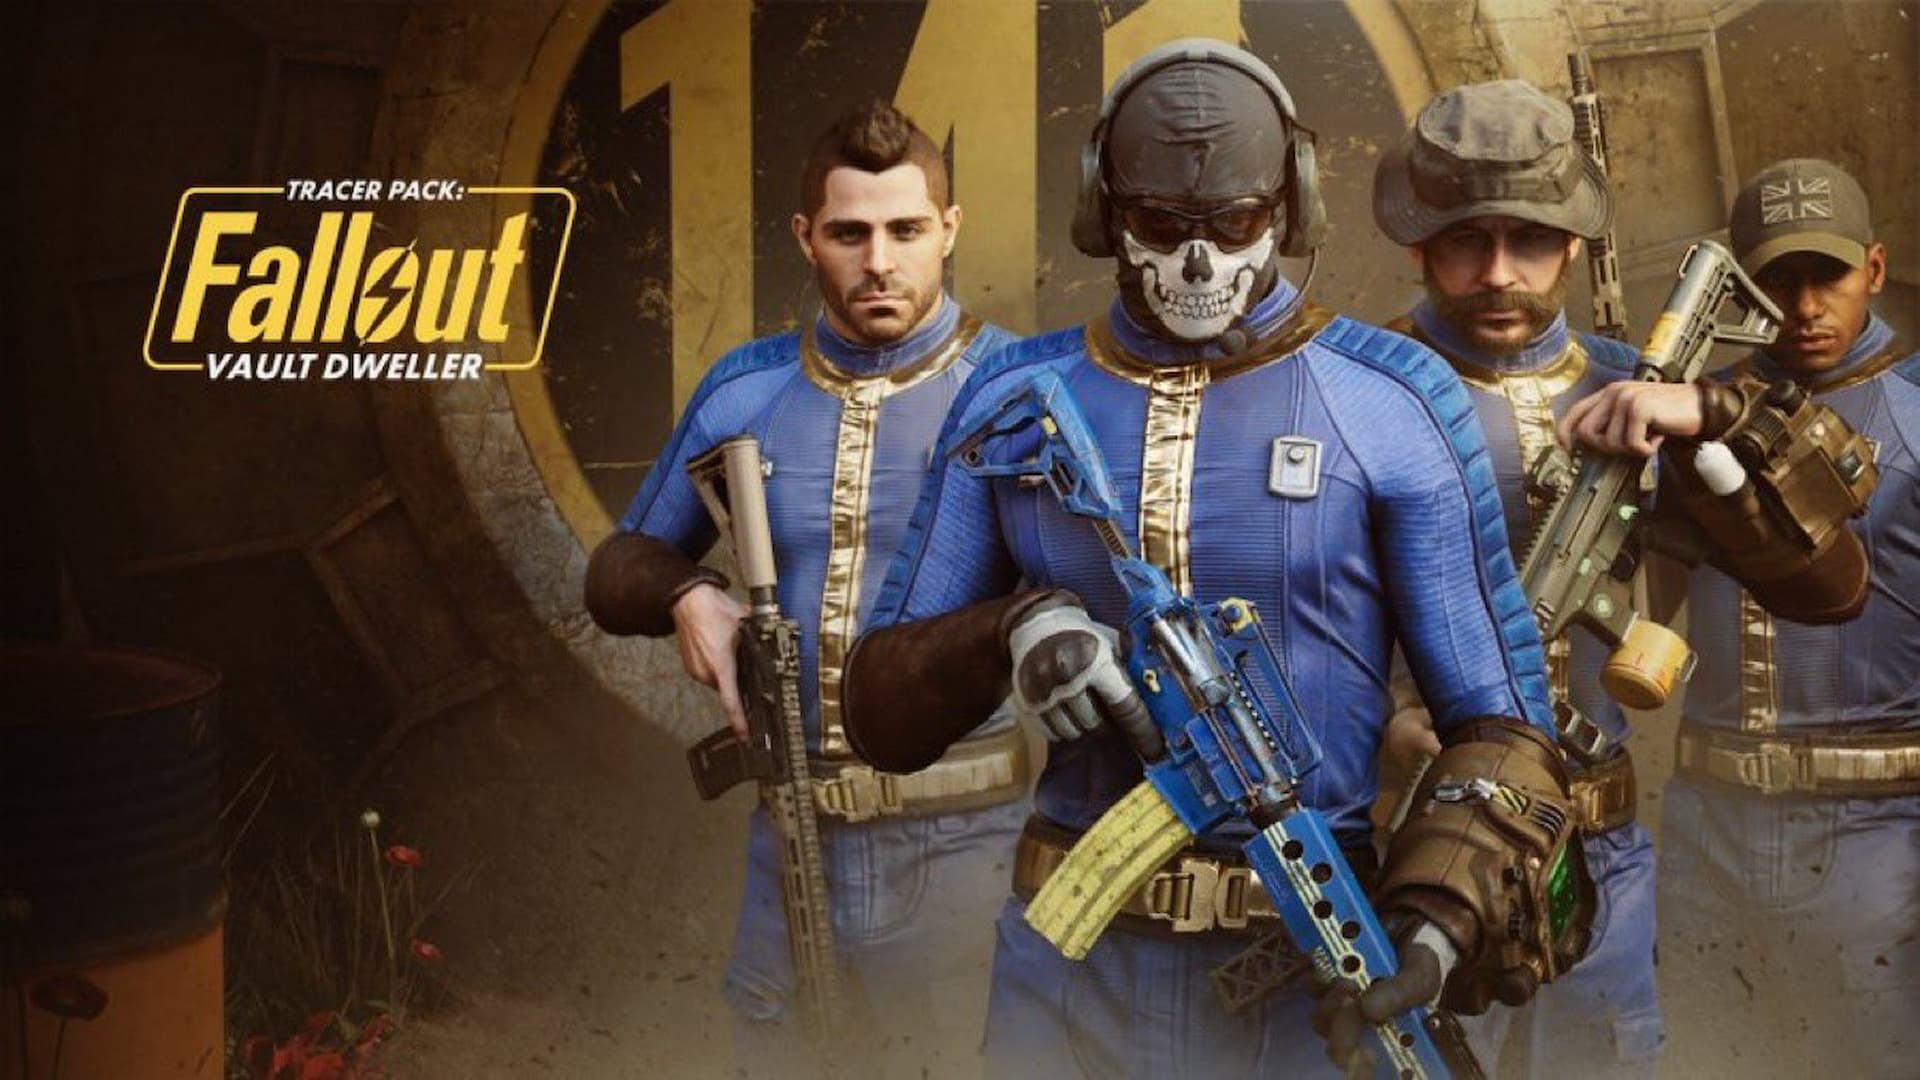 the keyart for the Fallout skins pack in Call of Duty